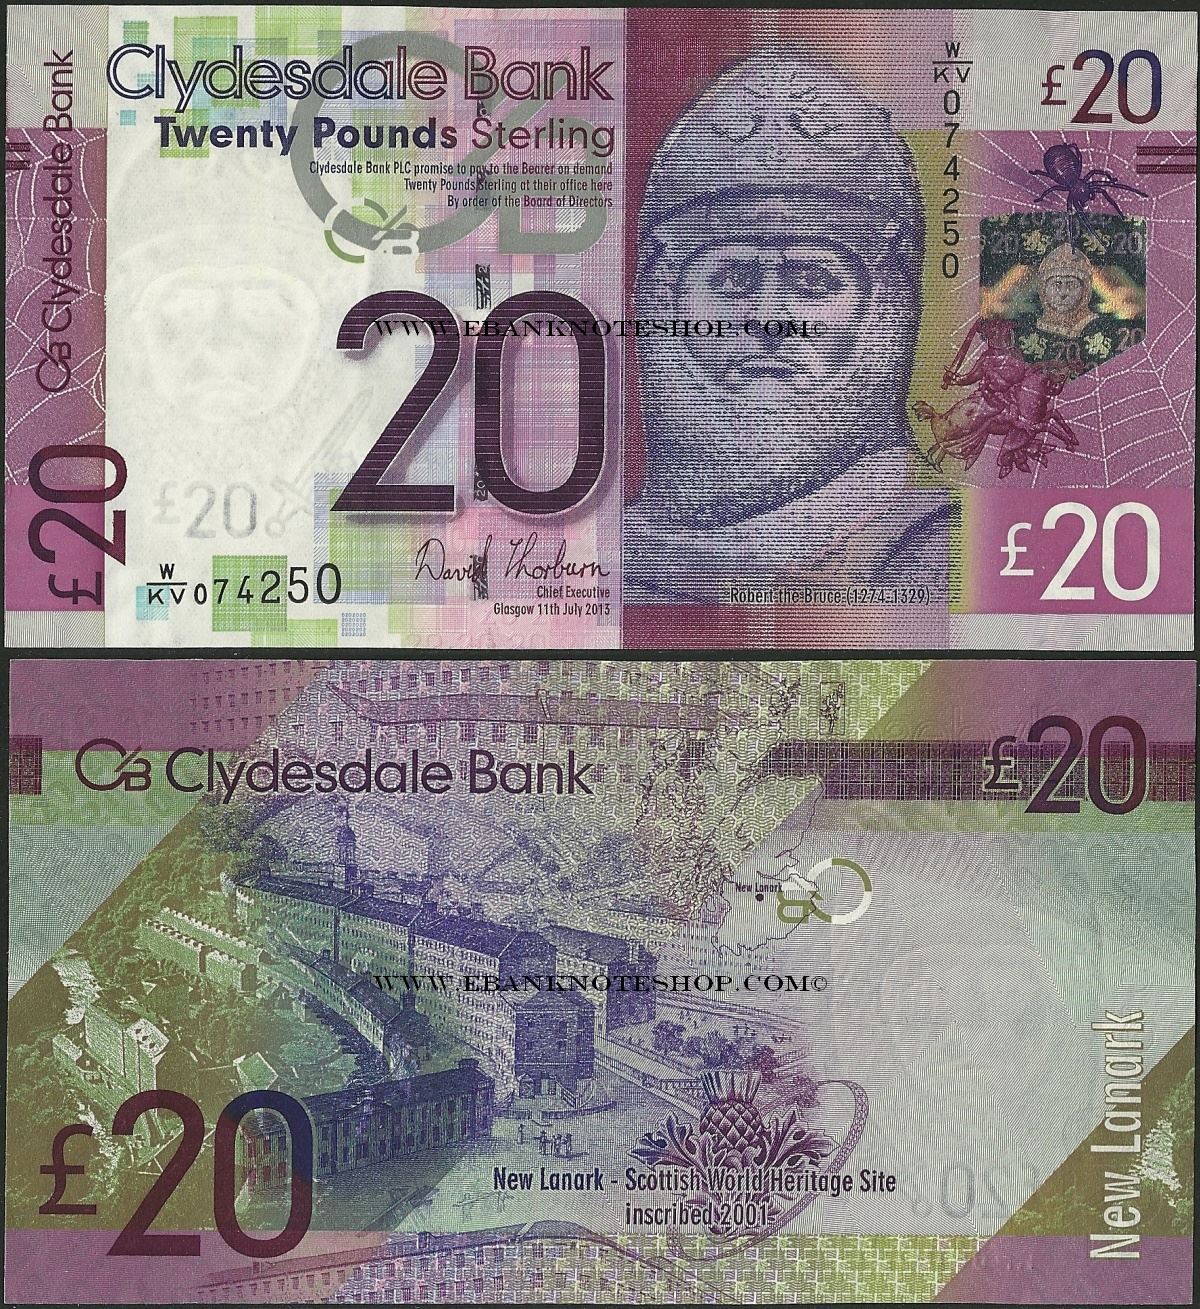 Ruglonians Warned Of Counterfeit Notes Daily Record